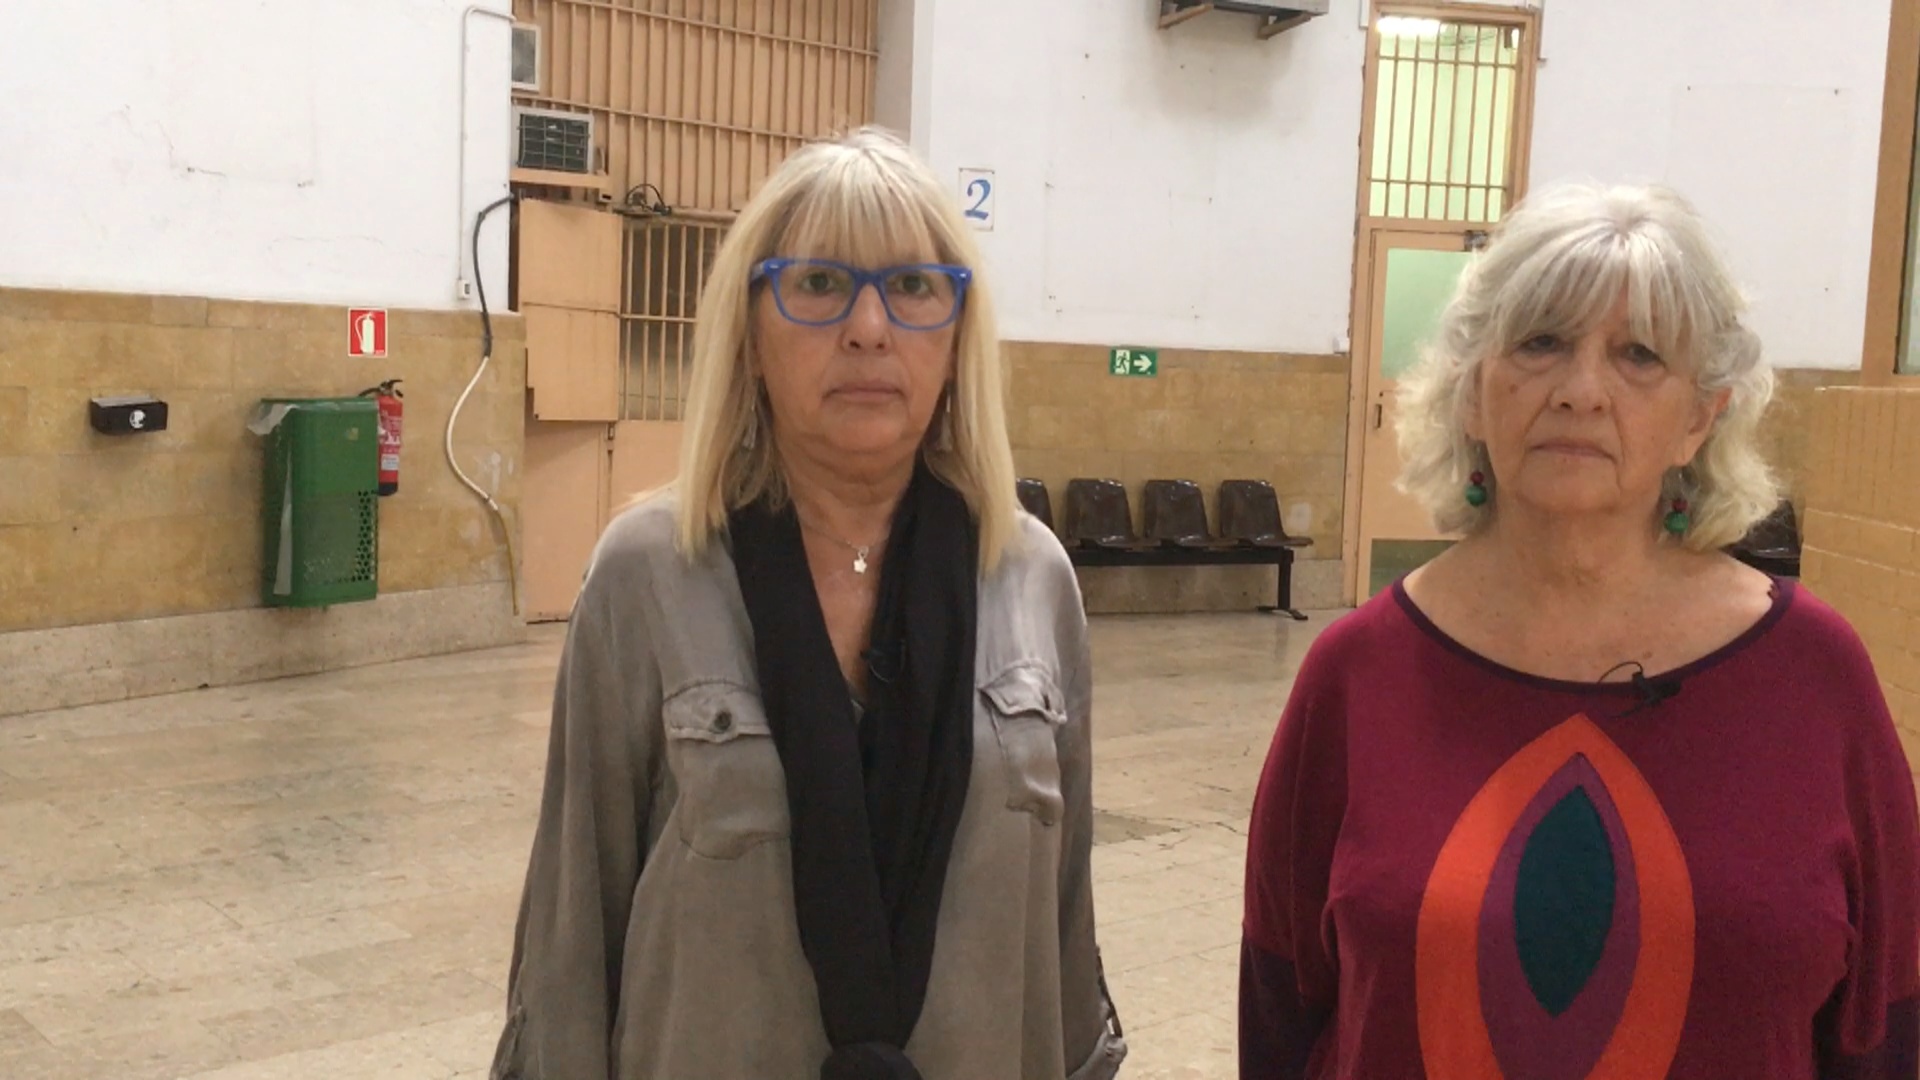  Salvador Puig Antich's sisters, Carme and Imma (by ACN)